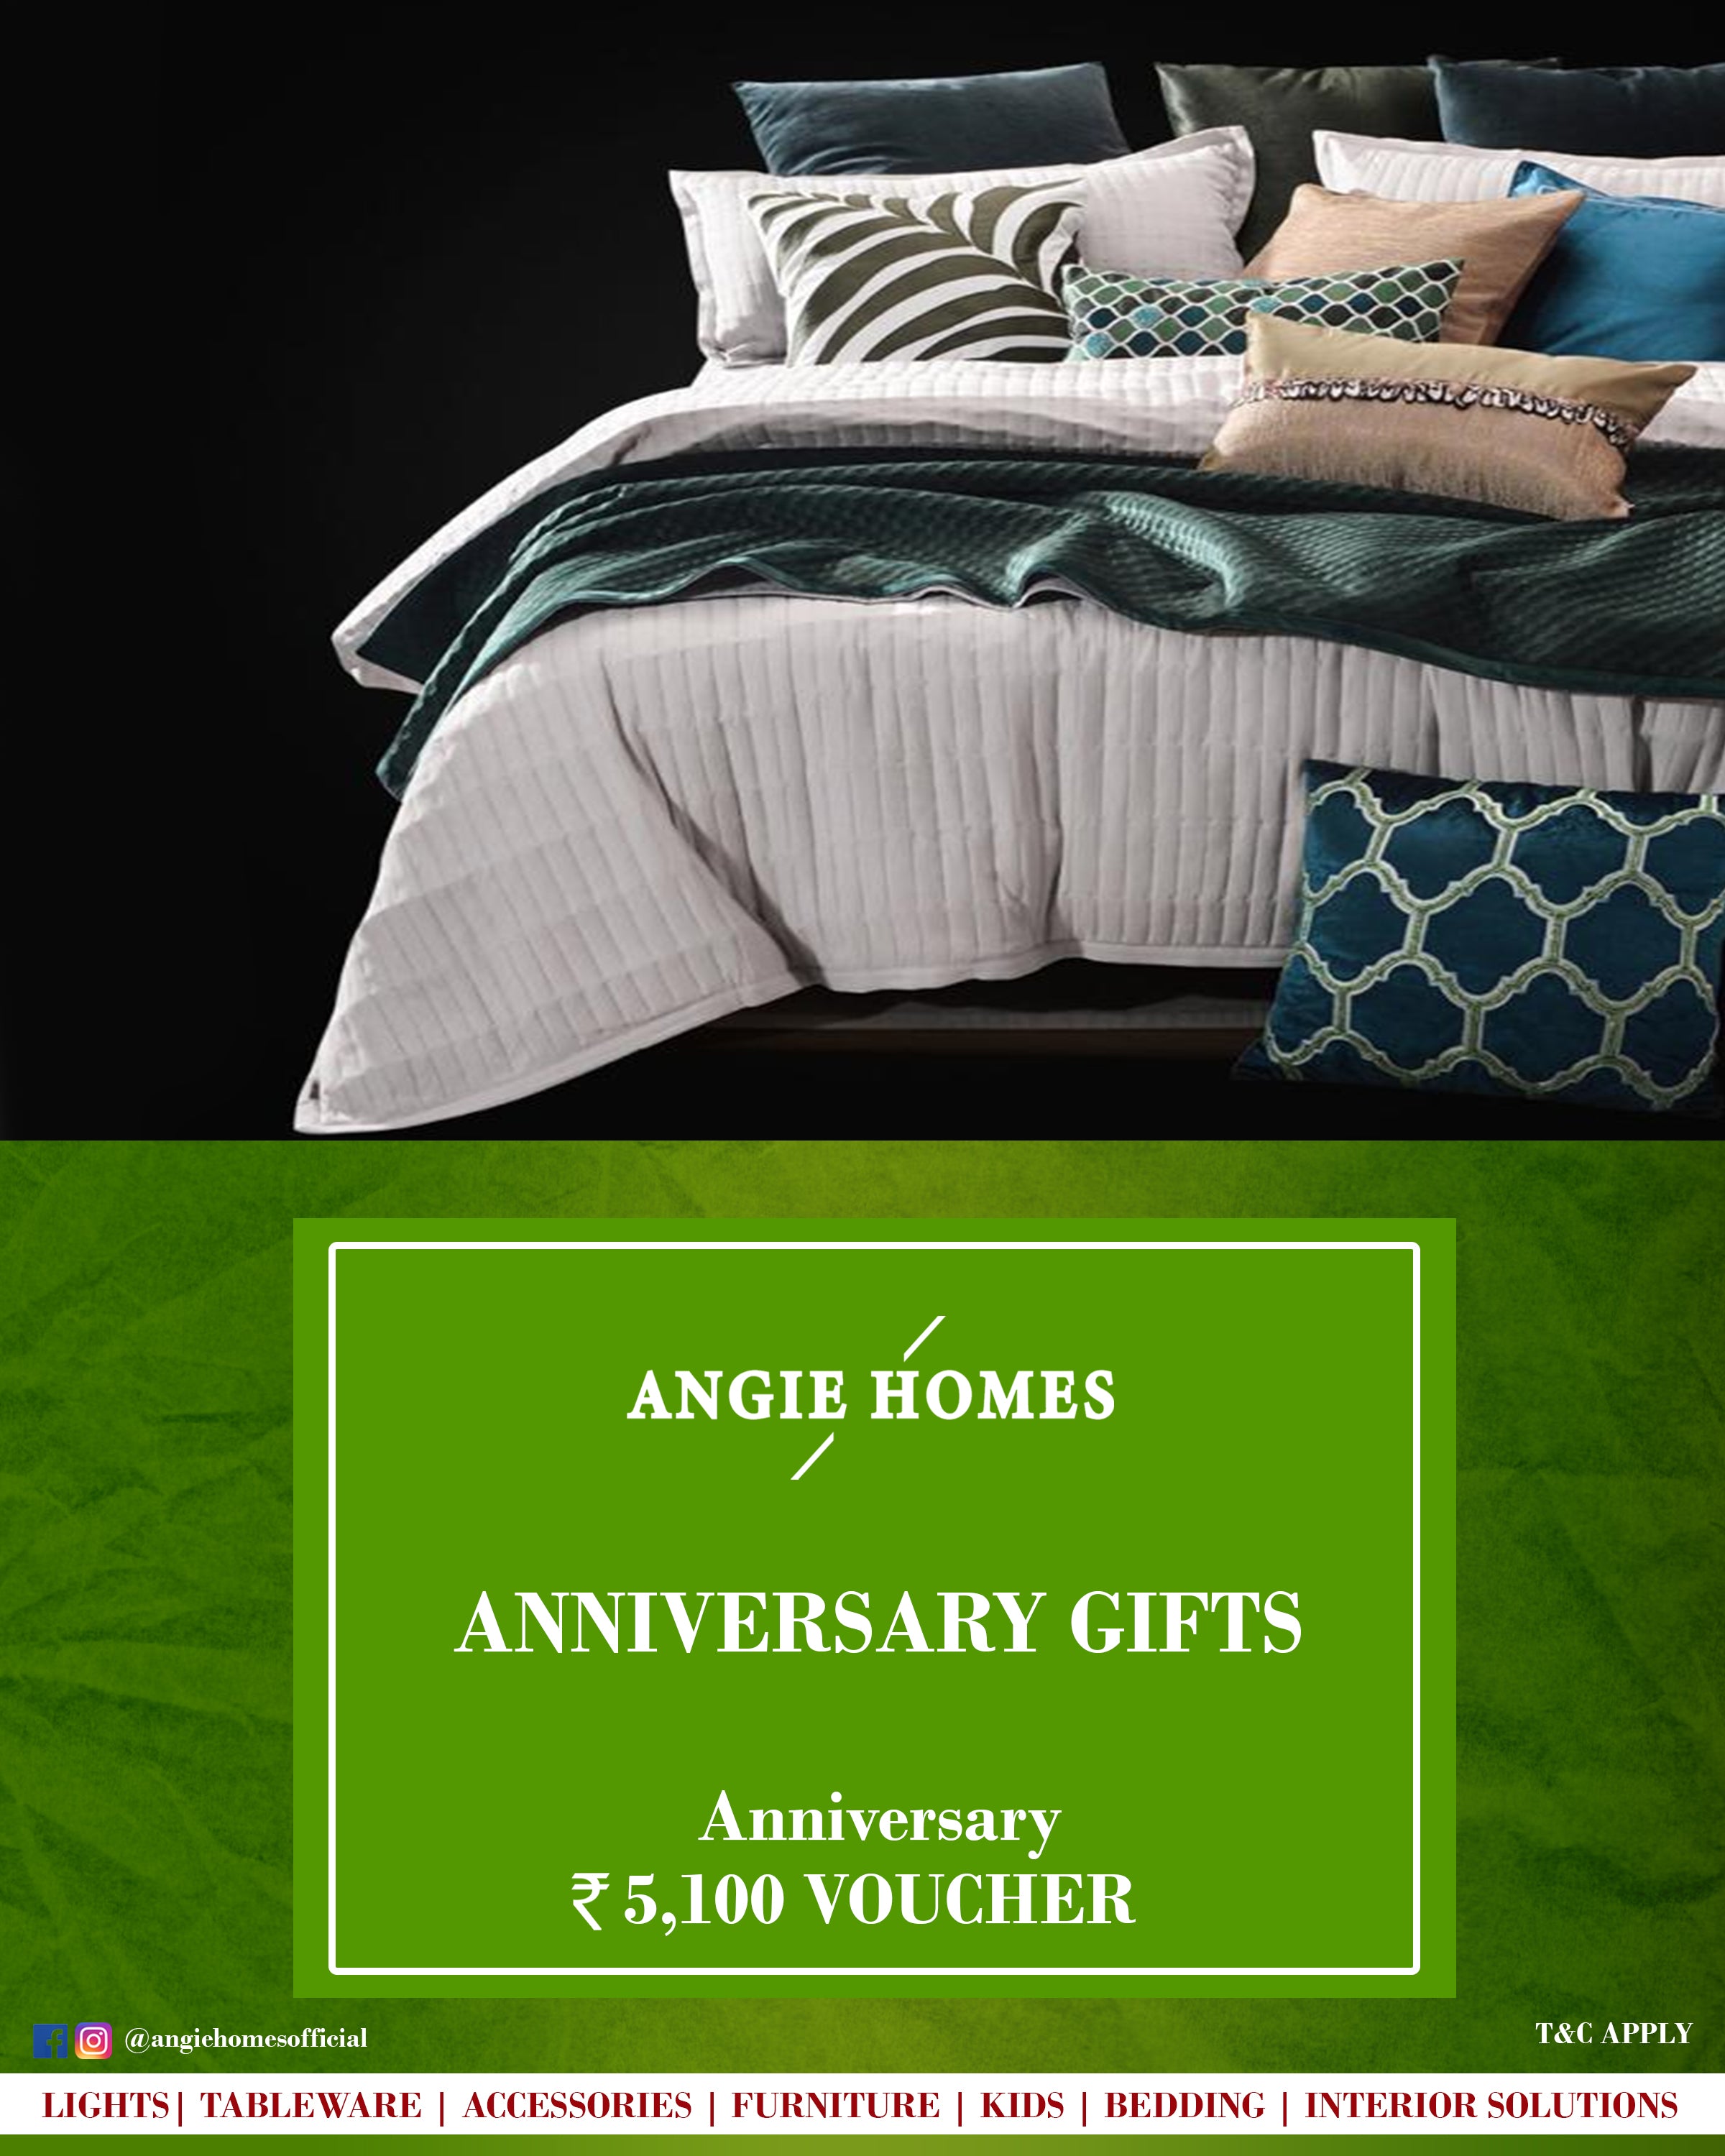 Blue Bed Set Gift Vouchers for Couple's Anniversary - Angie Homes ANGIE HOMES